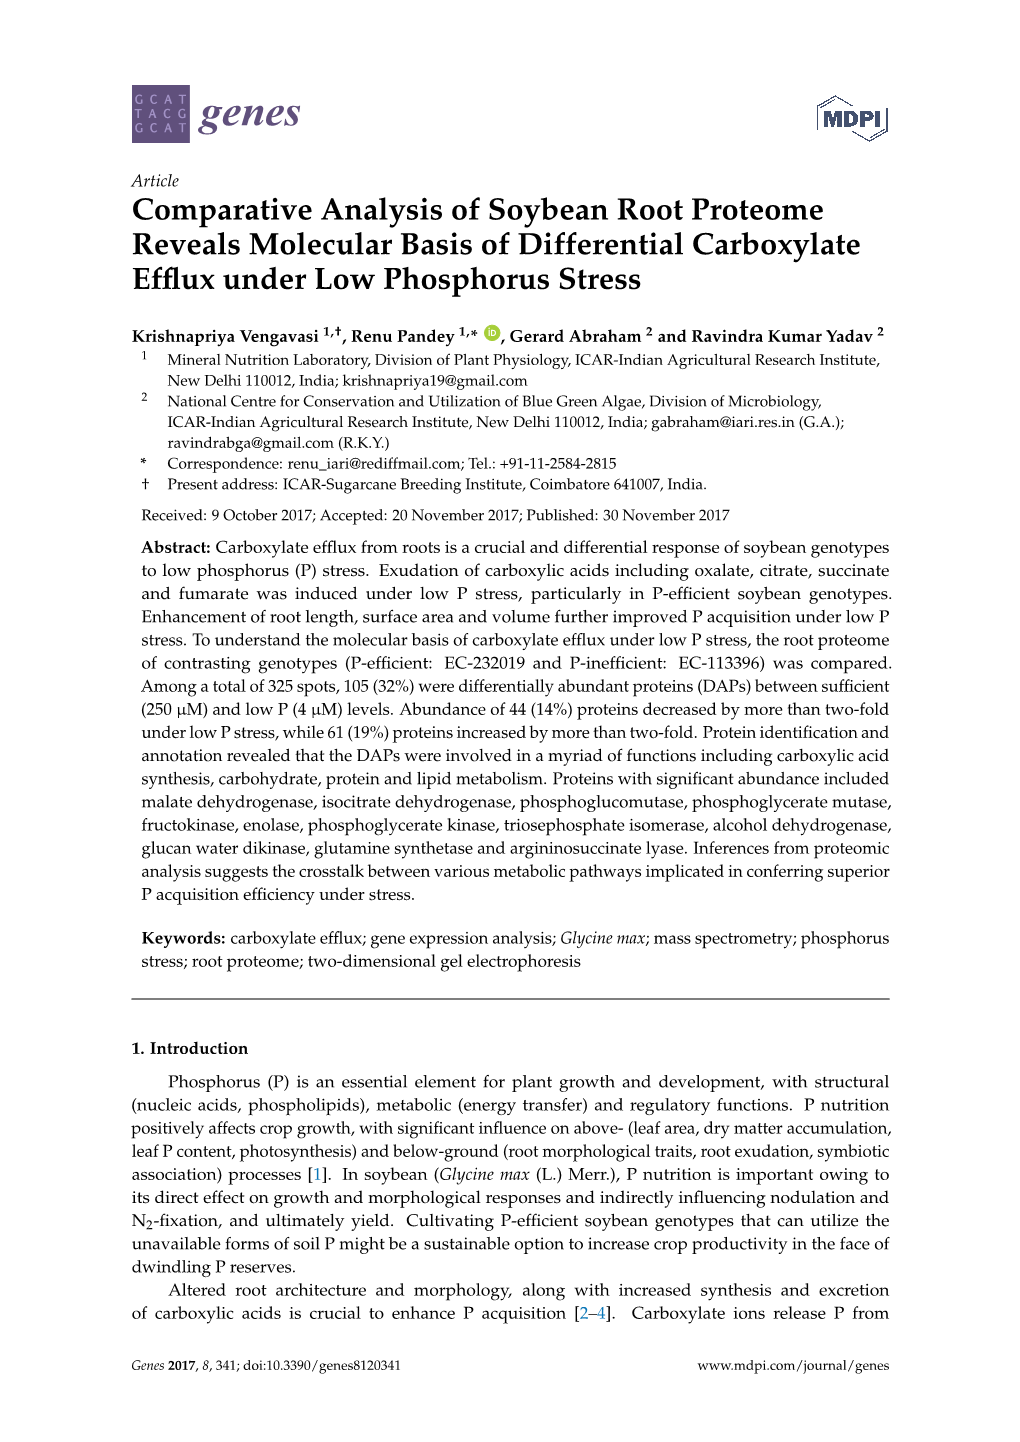 Comparative Analysis of Soybean Root Proteome Reveals Molecular Basis of Differential Carboxylate Efflux Under Low Phosphorus St